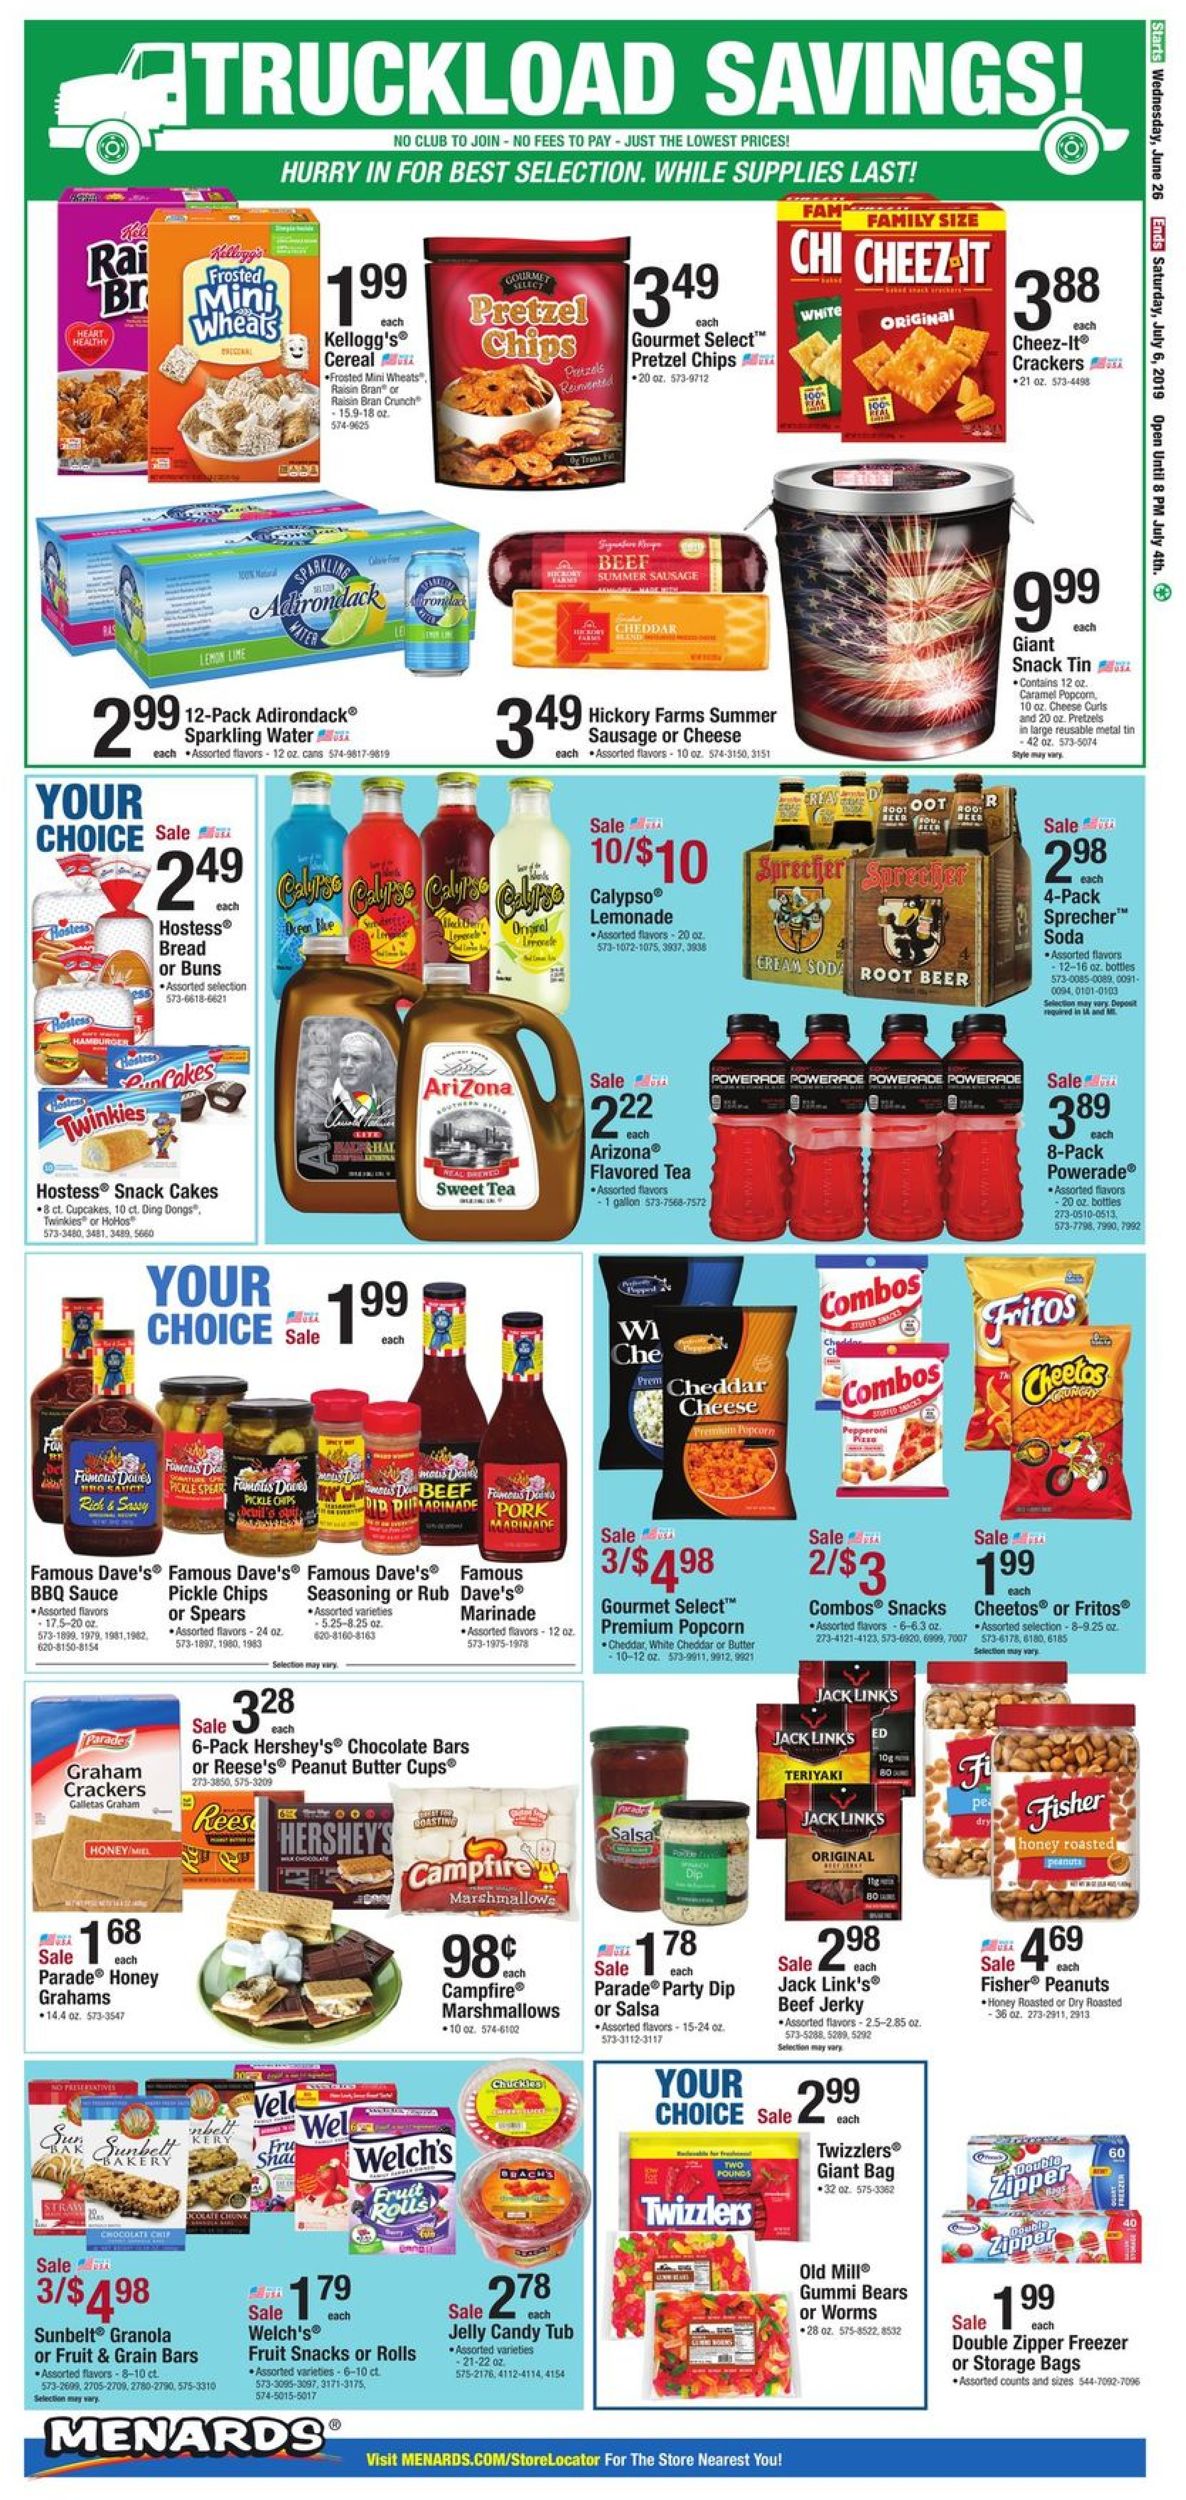 Menards Current weekly ad 06/26 - 07/06/2019 [8] - 0